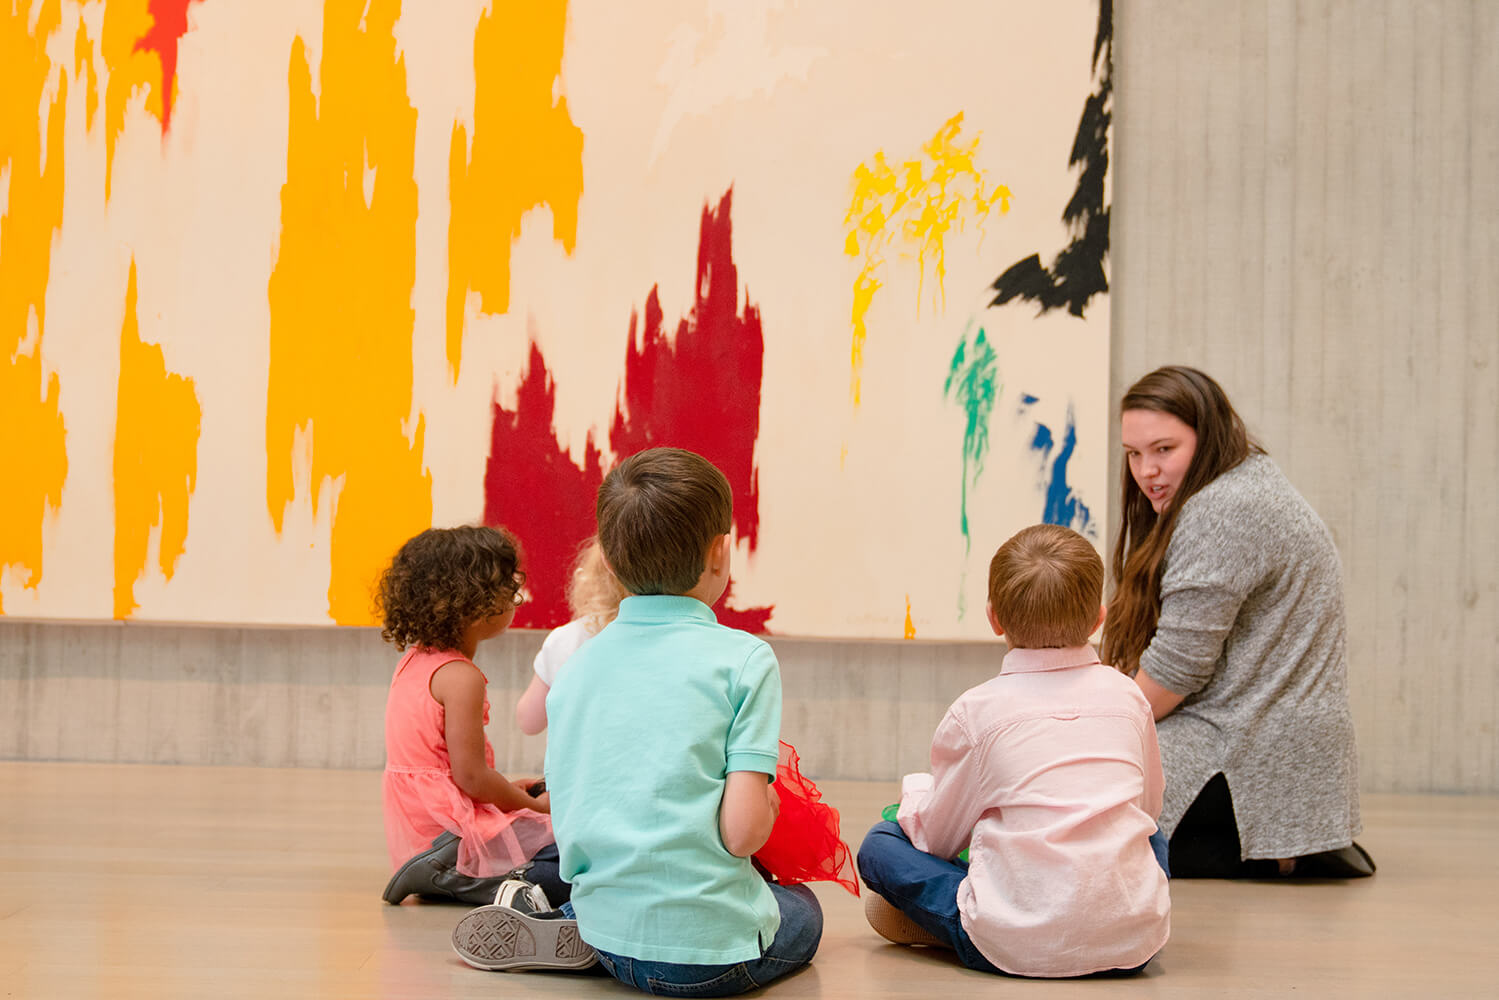 A group of young children sit on the floor in front of a large colorful painting with a teacher